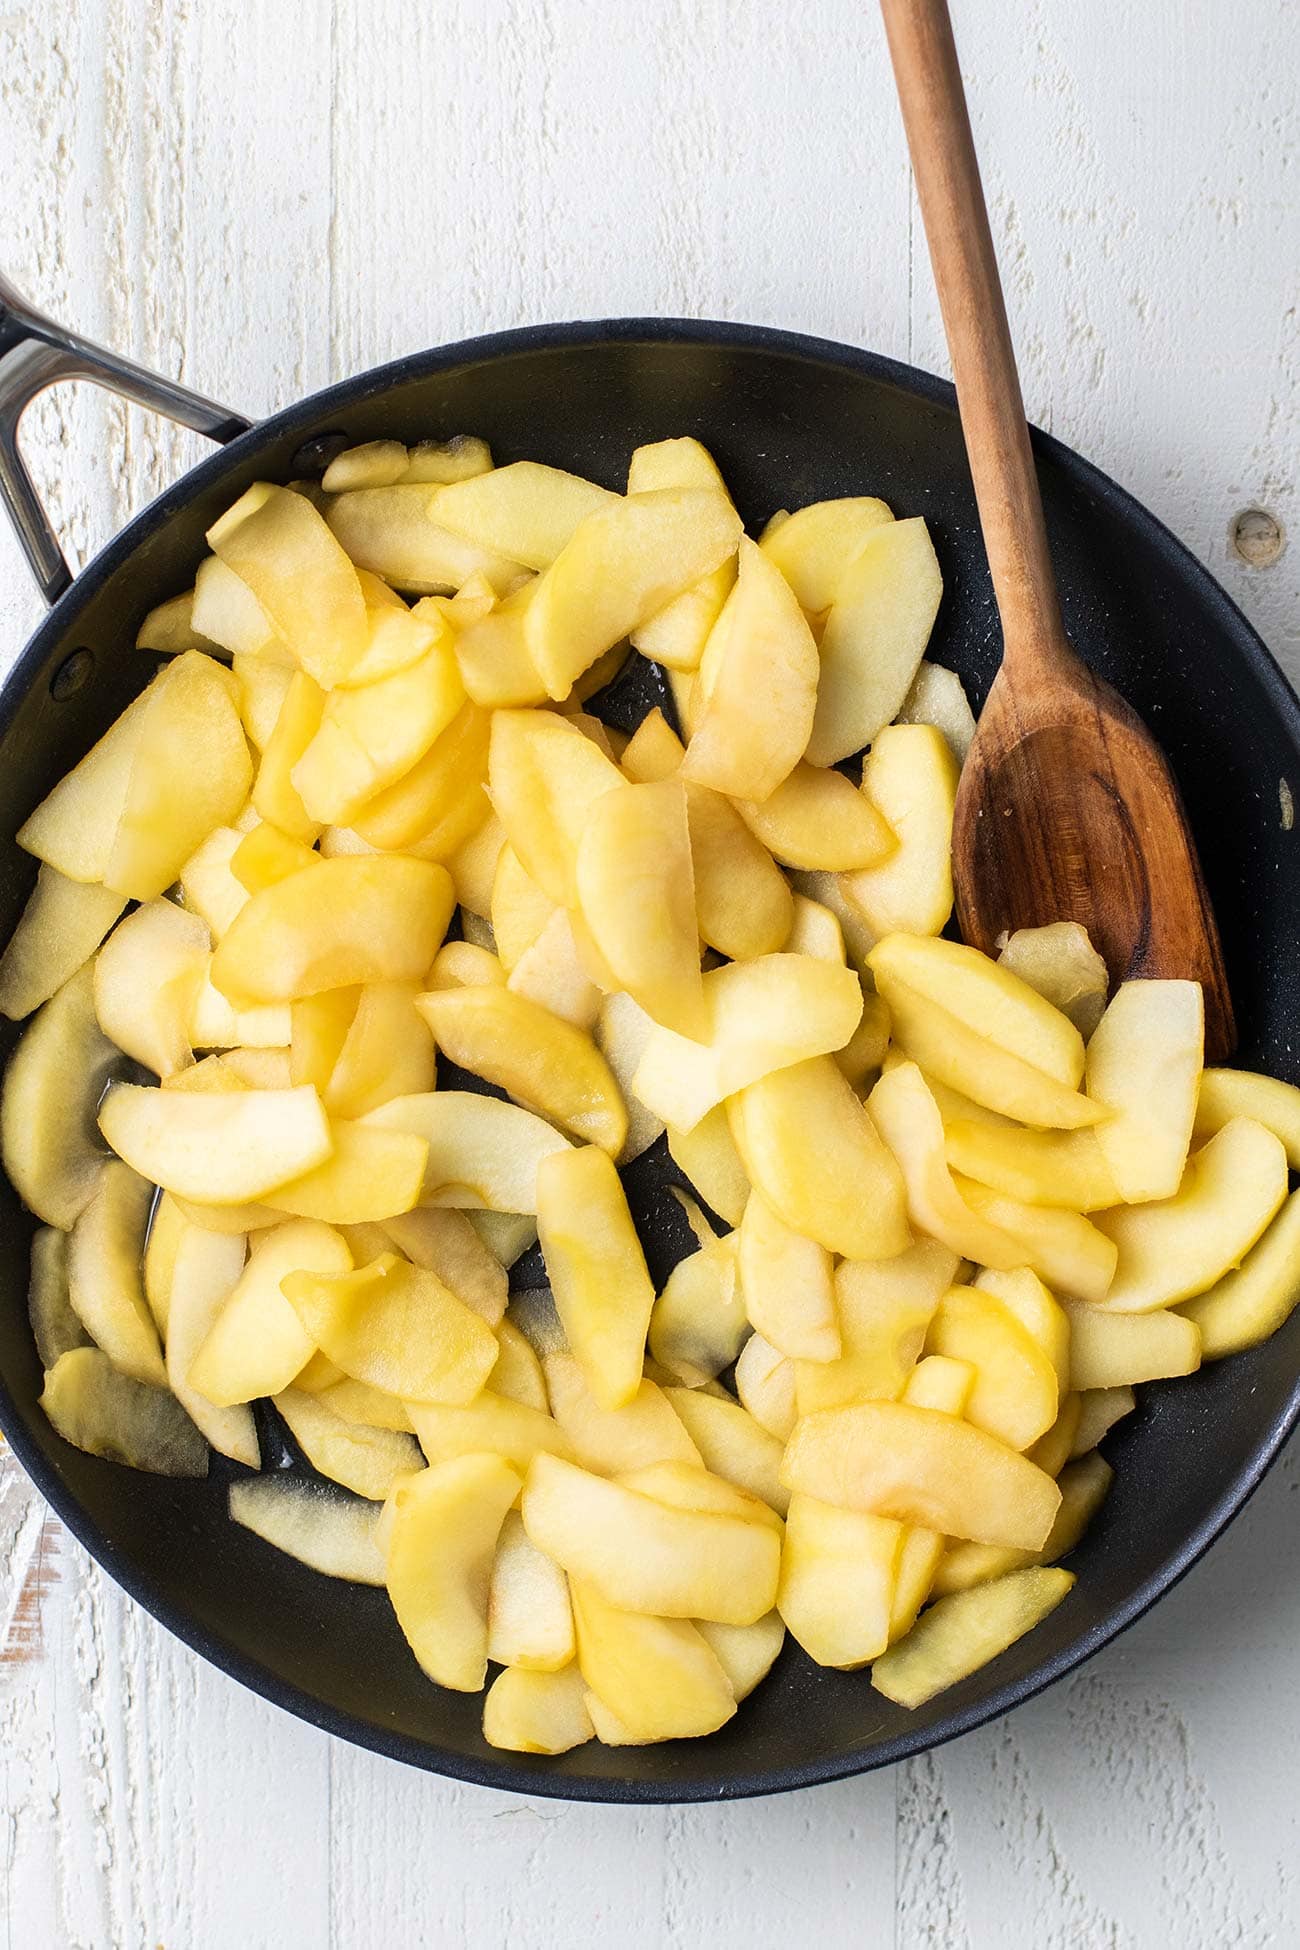 Apple slices in a skillet shown being sauteed.